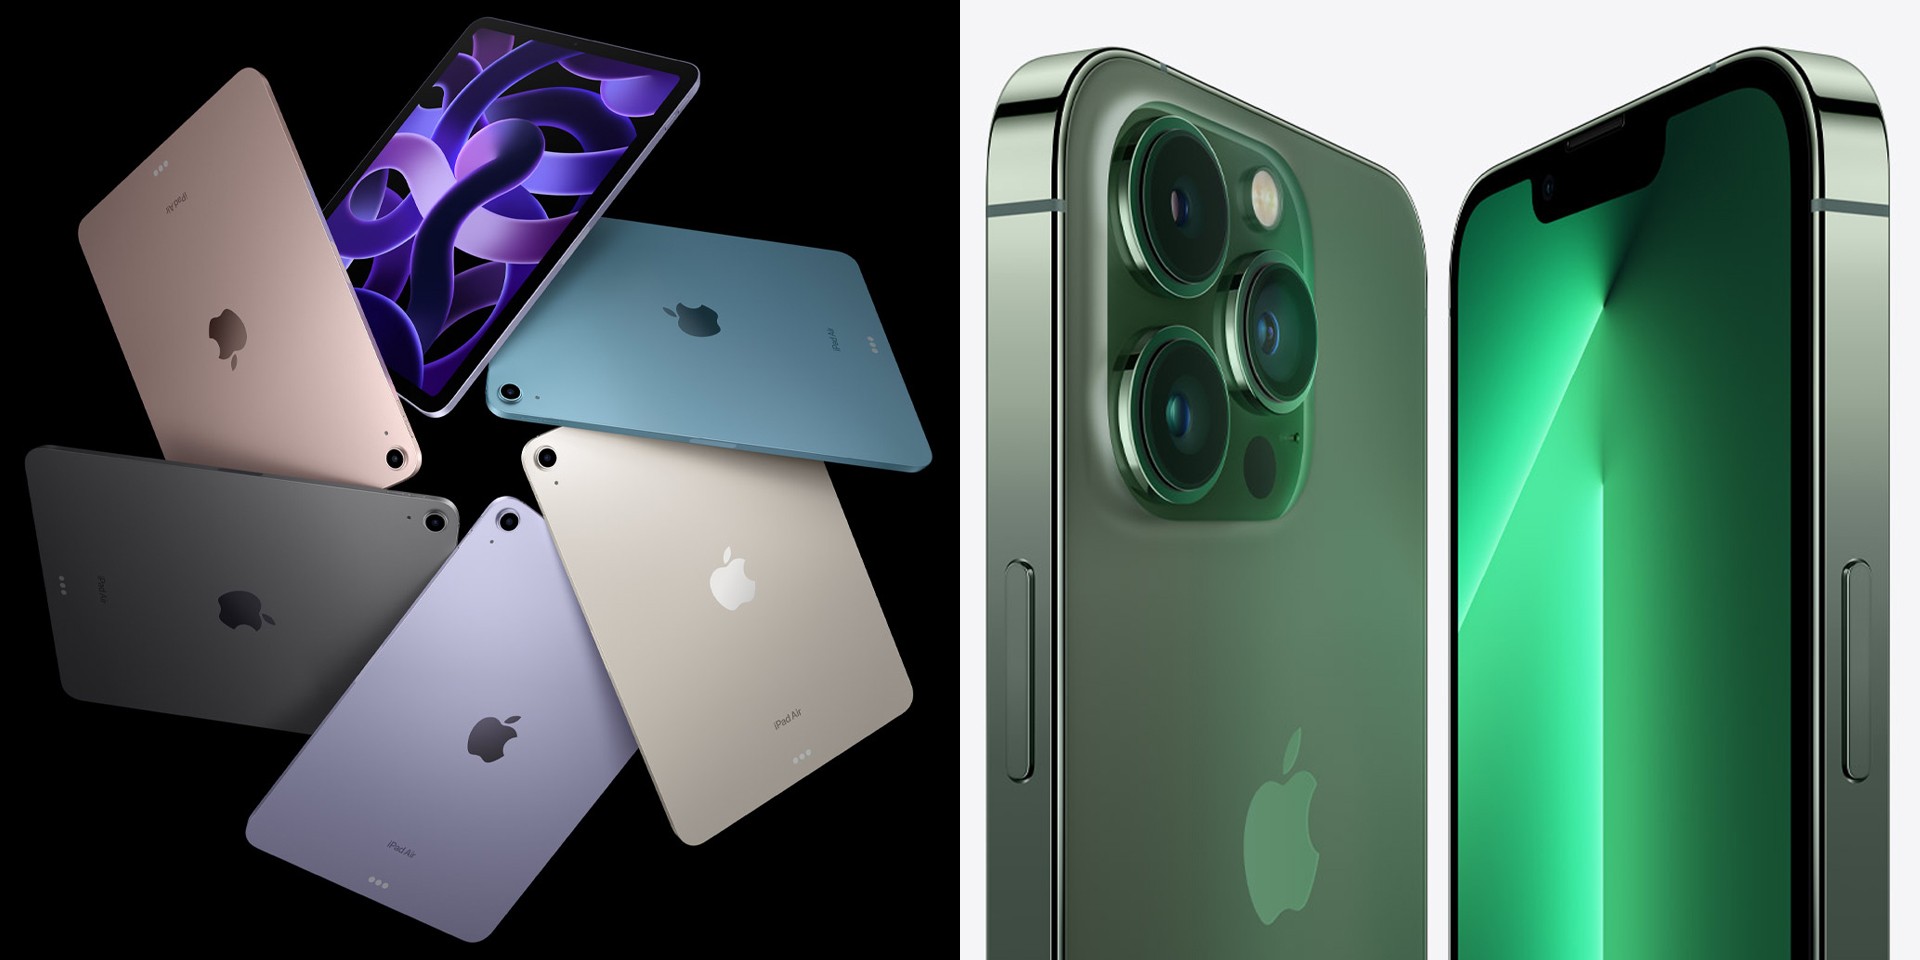 Apple introduces new iPhone 13 and SE models, improved iPad Air, new Mac Studio